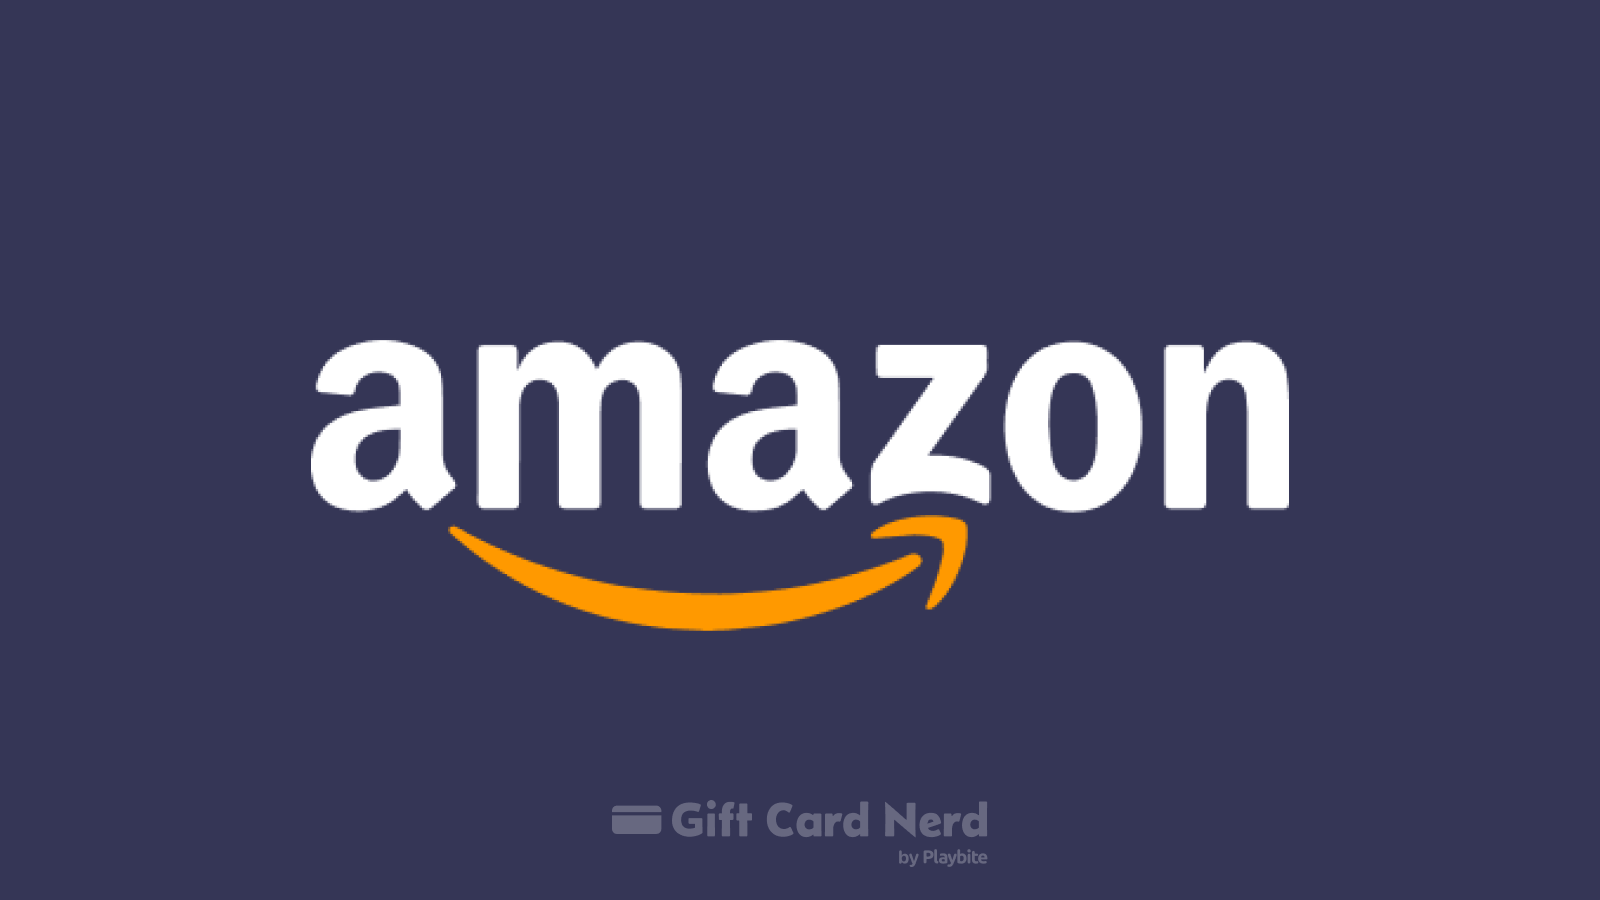 Where to Buy Amazon Gift Cards